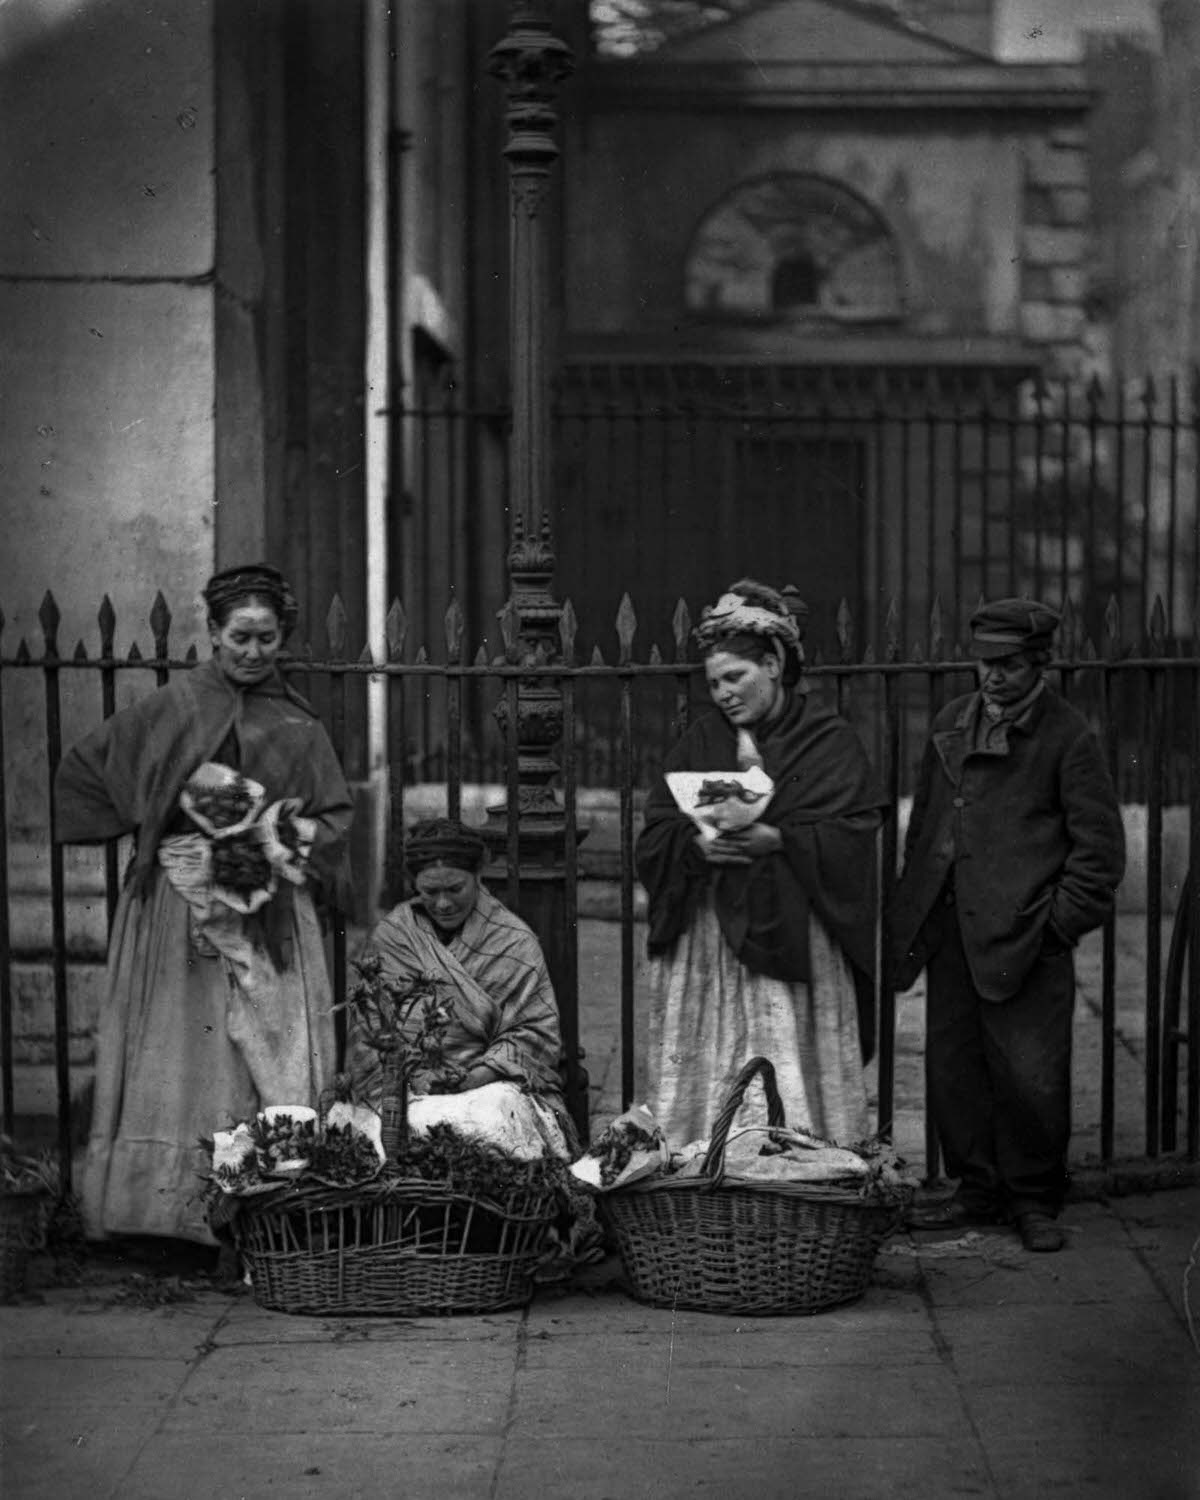 Flower women selling bouquets at Covent Garden market, 1877.